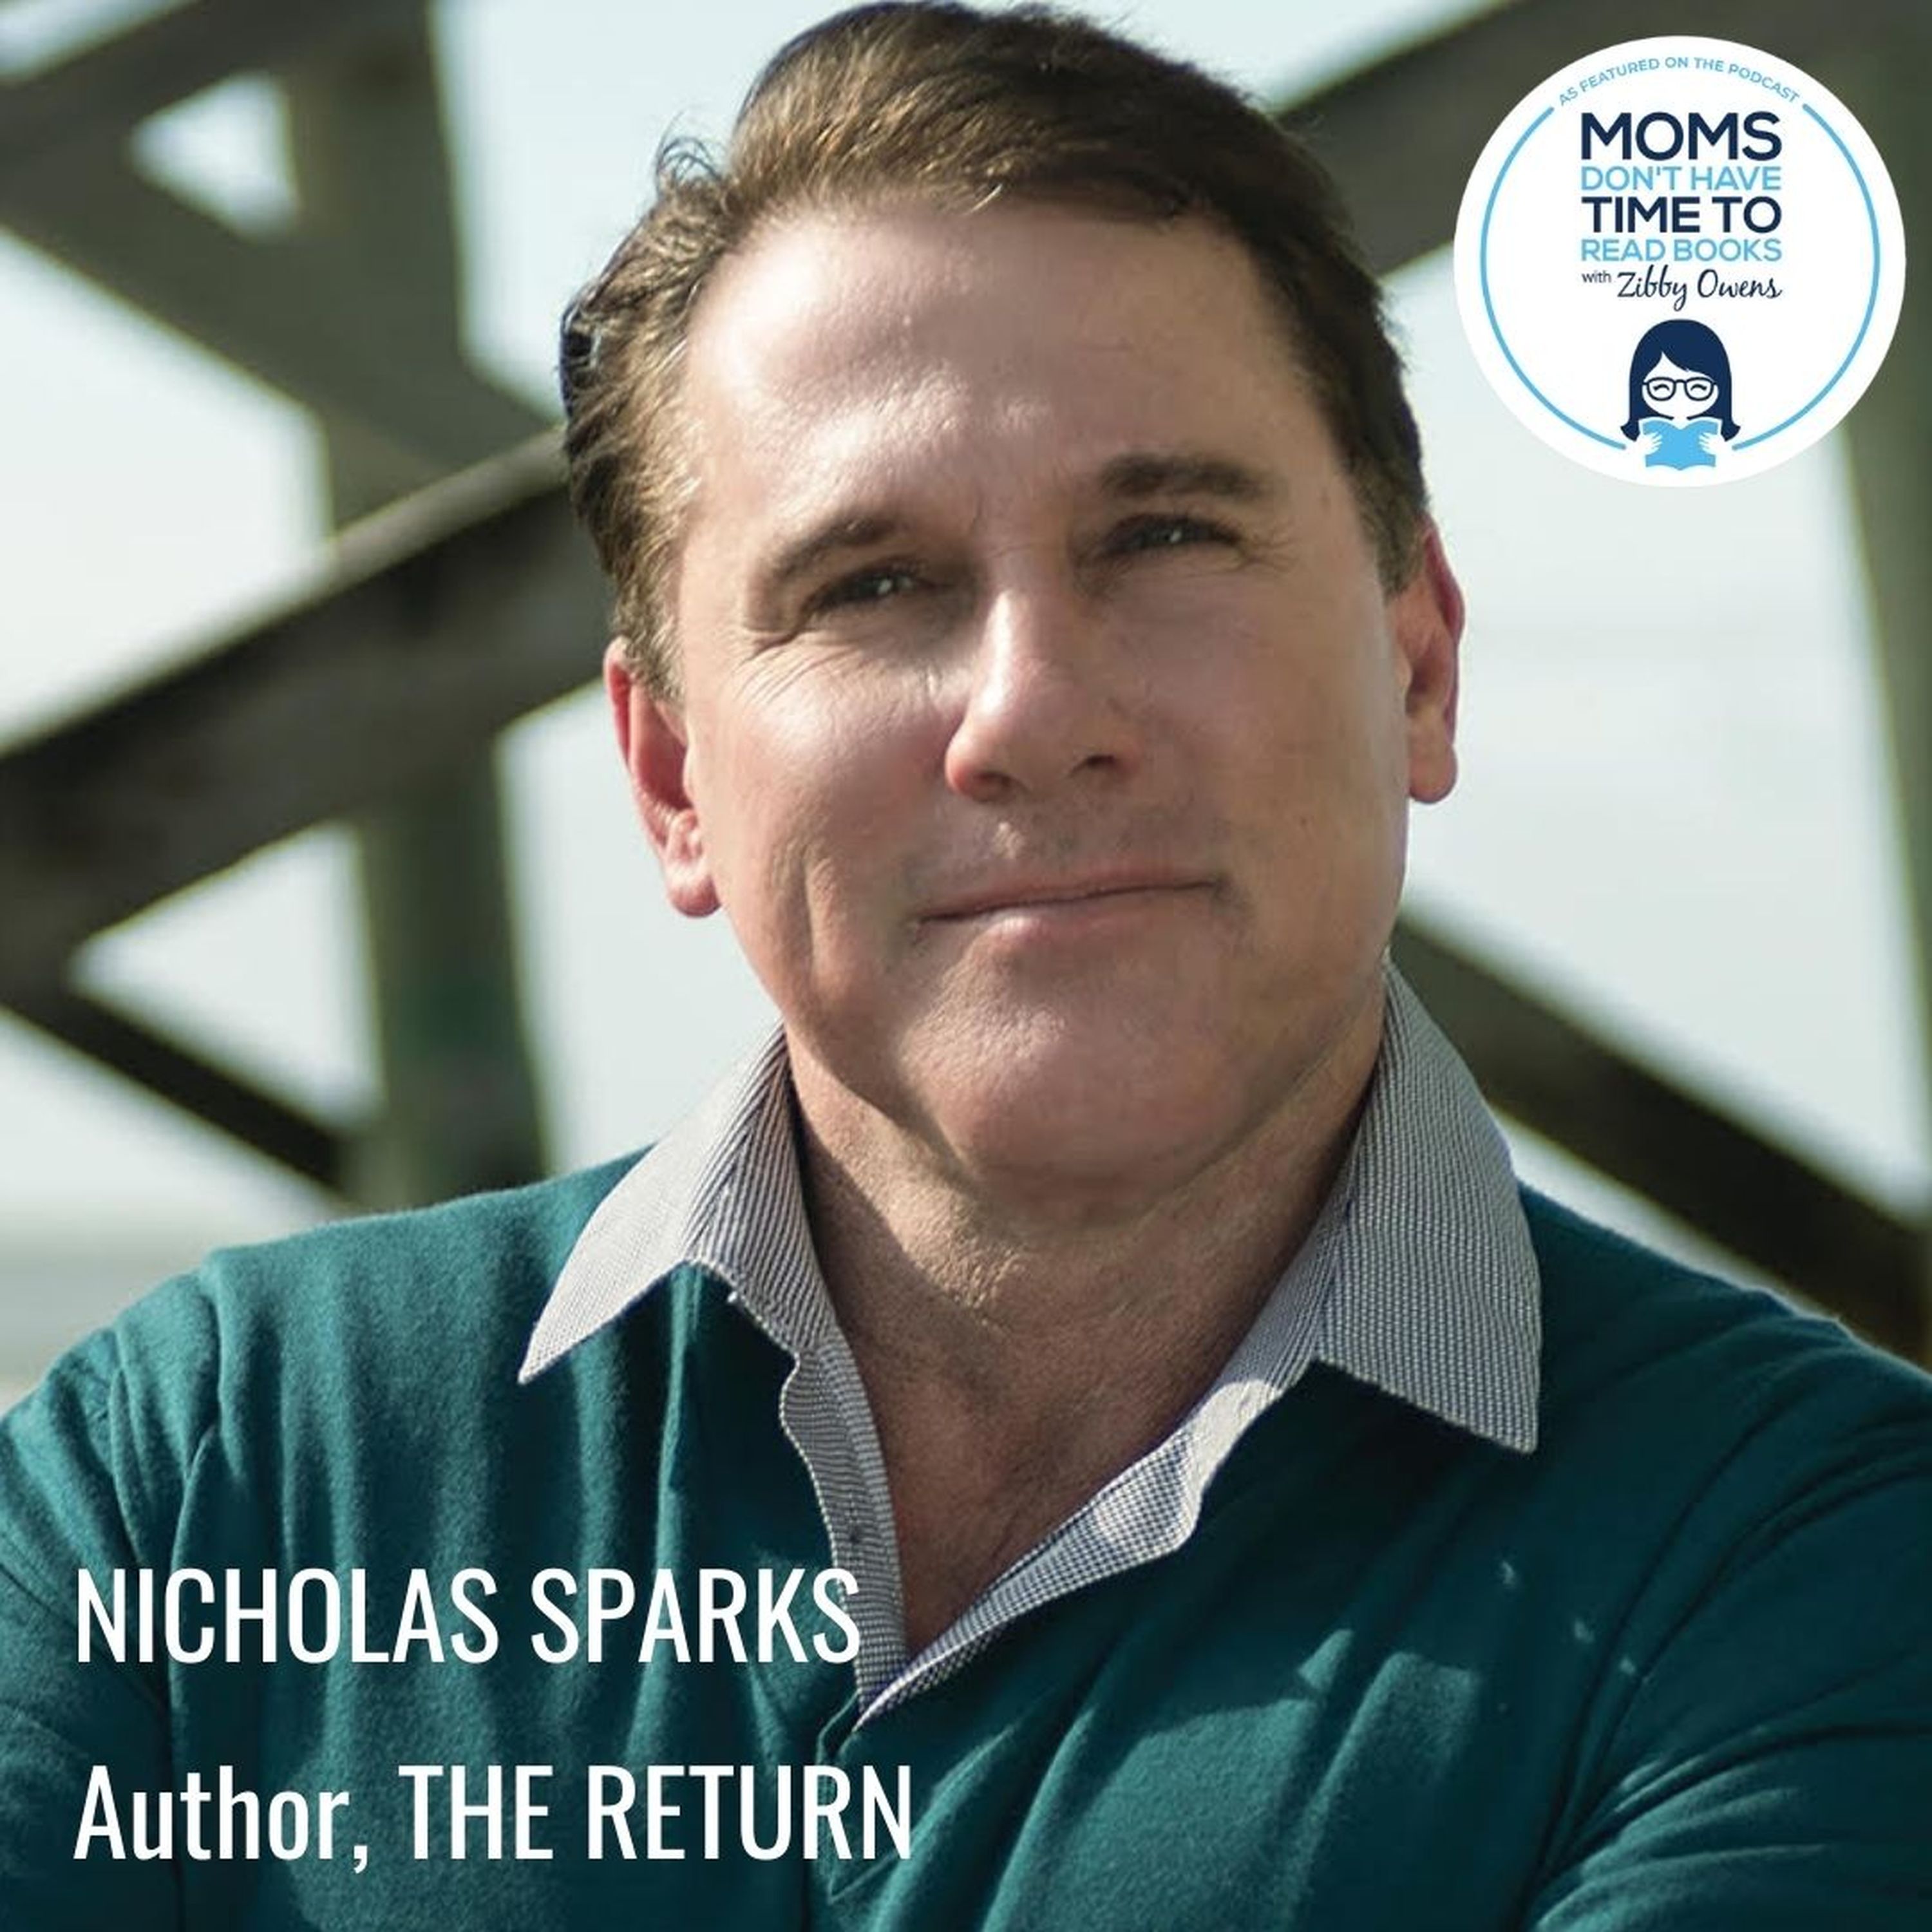 Nicholas Sparks, THE RETURN Moms Don’t Have Time to Read Books